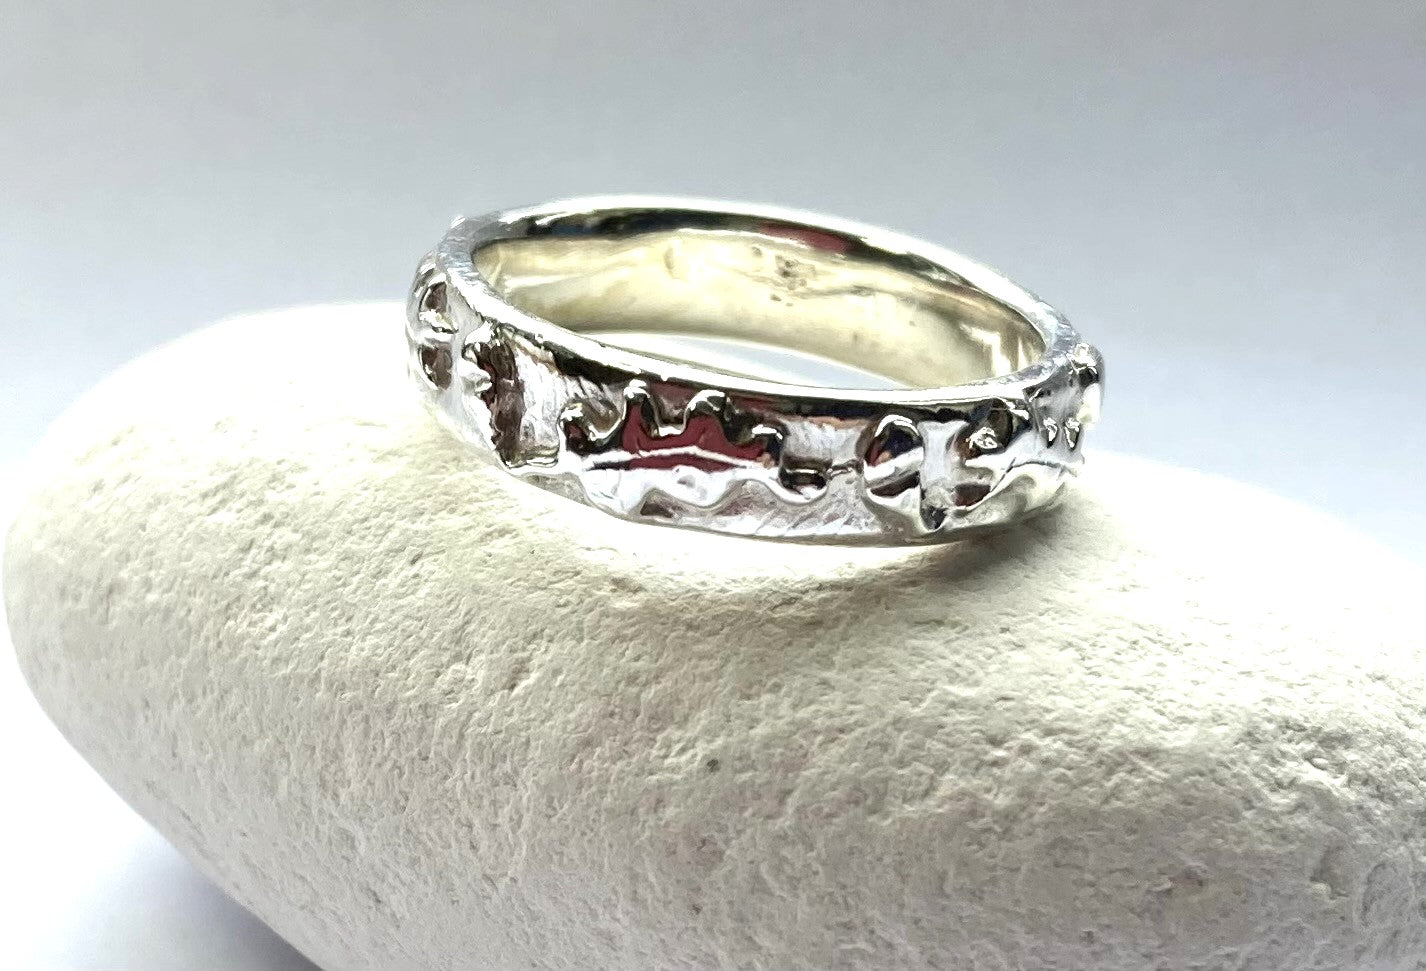 Oak and Acorn chunky white gold wedding ring- Price for variants on enquiry, Made to Order